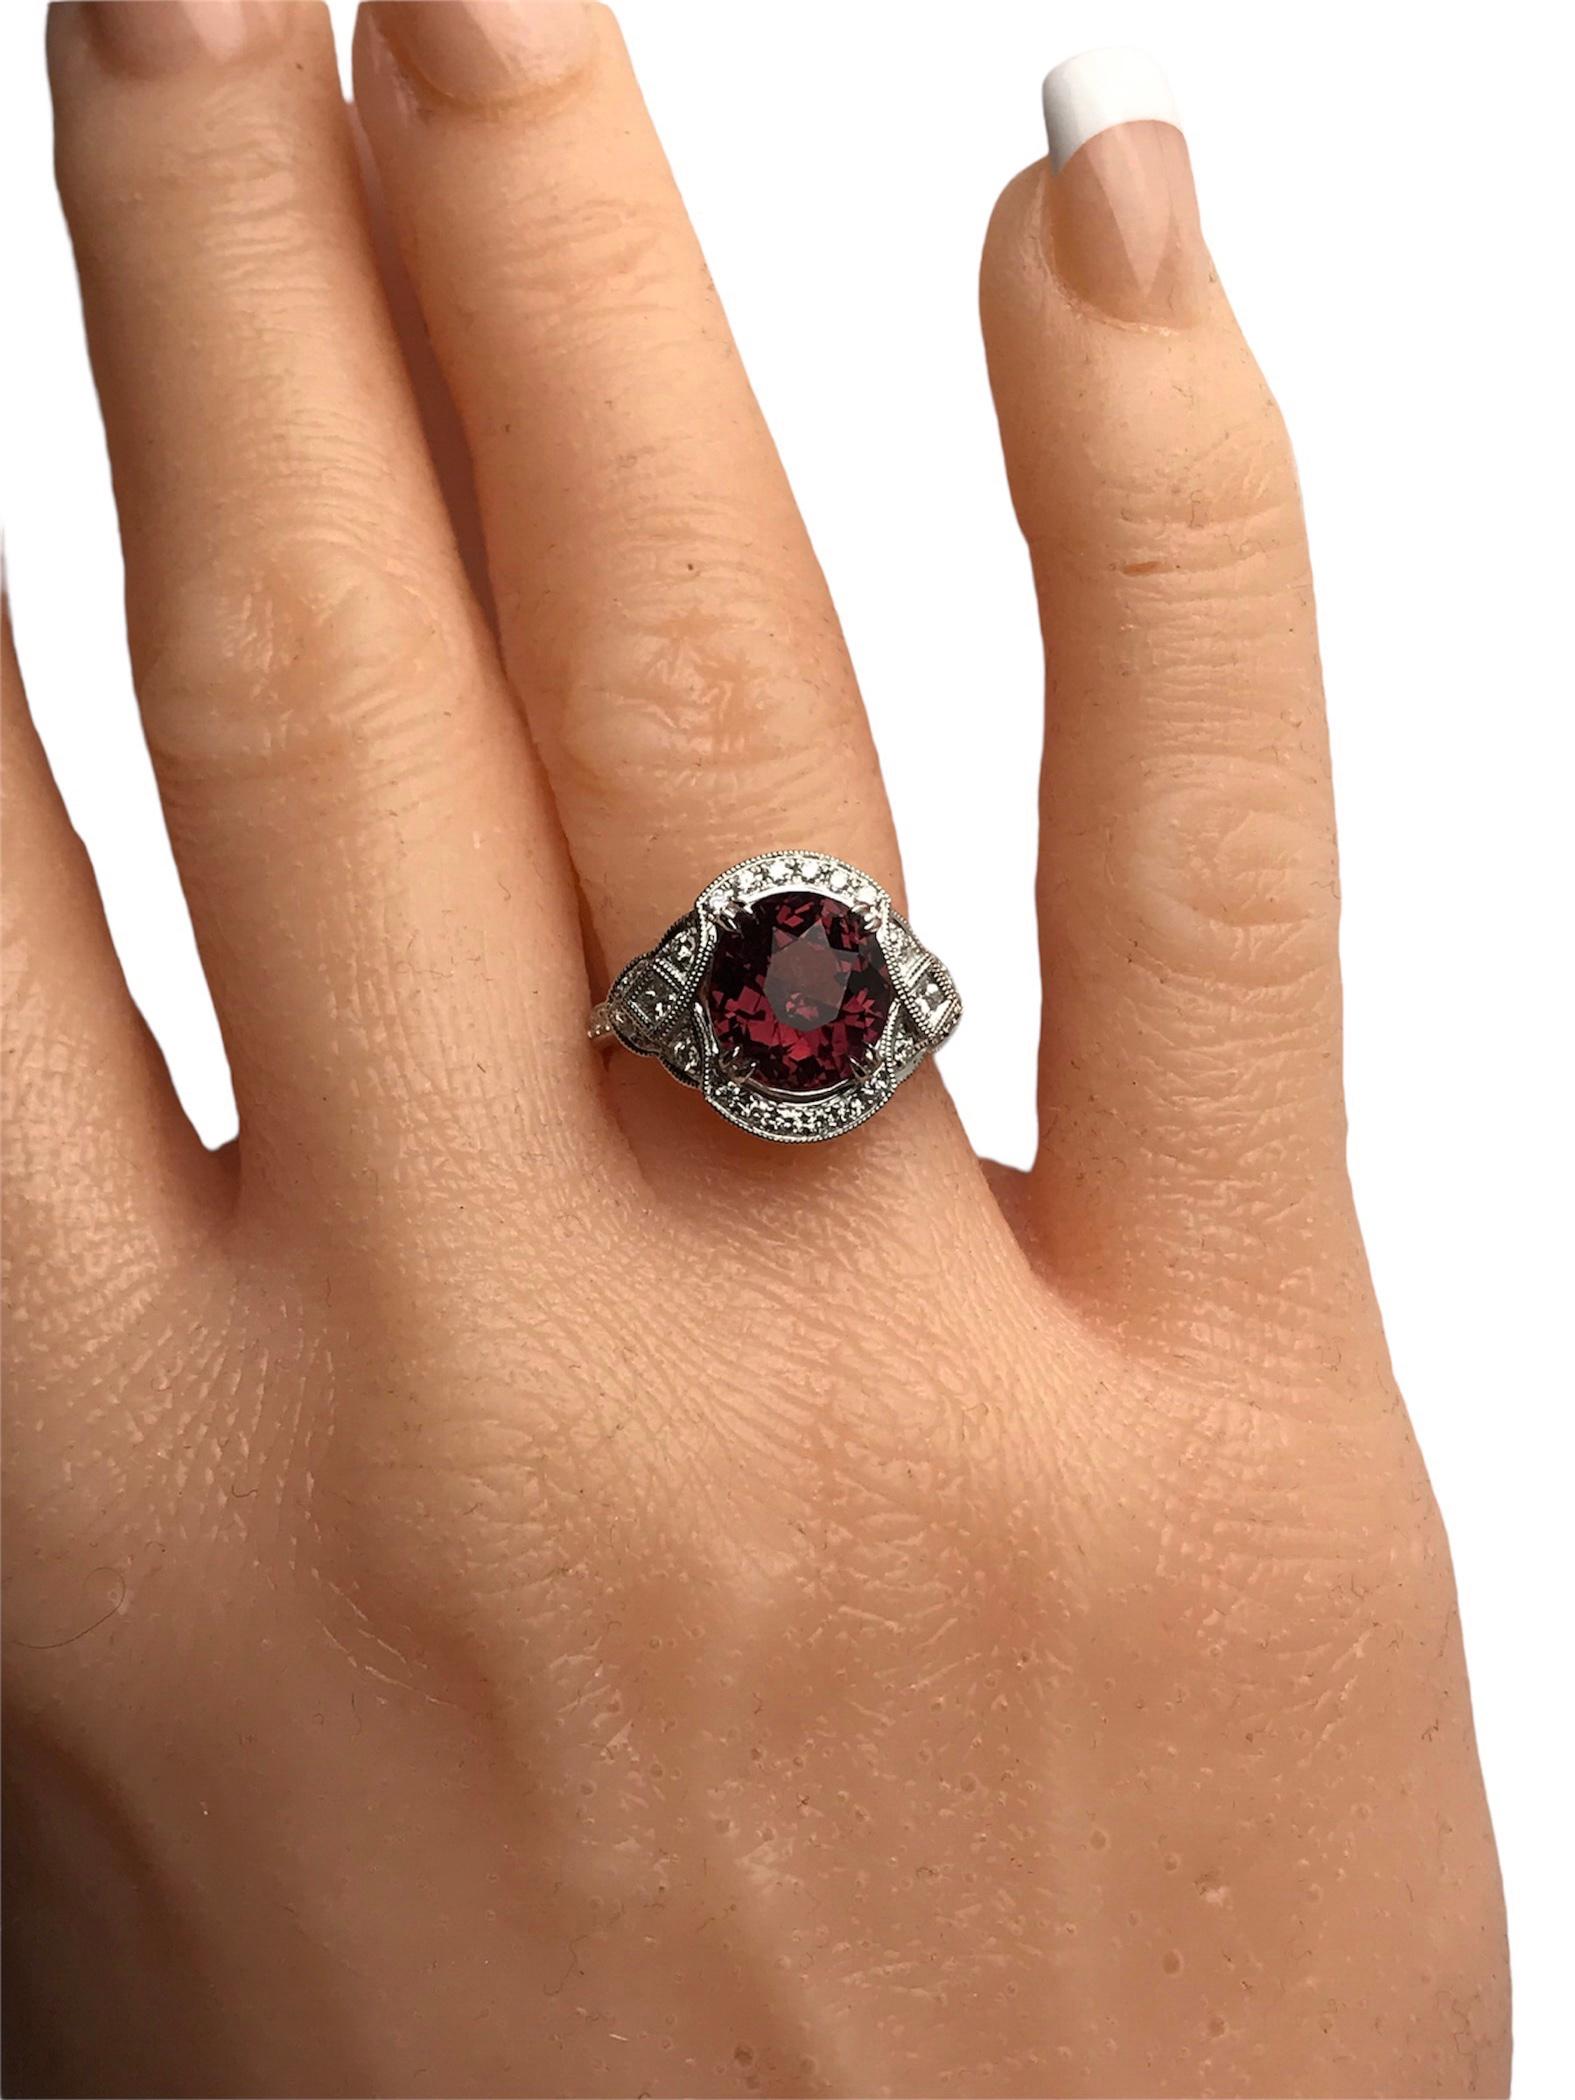 4.59 Carat Oval Cut Exotic Garnet and Natural Diamond Ring in 18k White ref1209 In New Condition For Sale In New York, NY